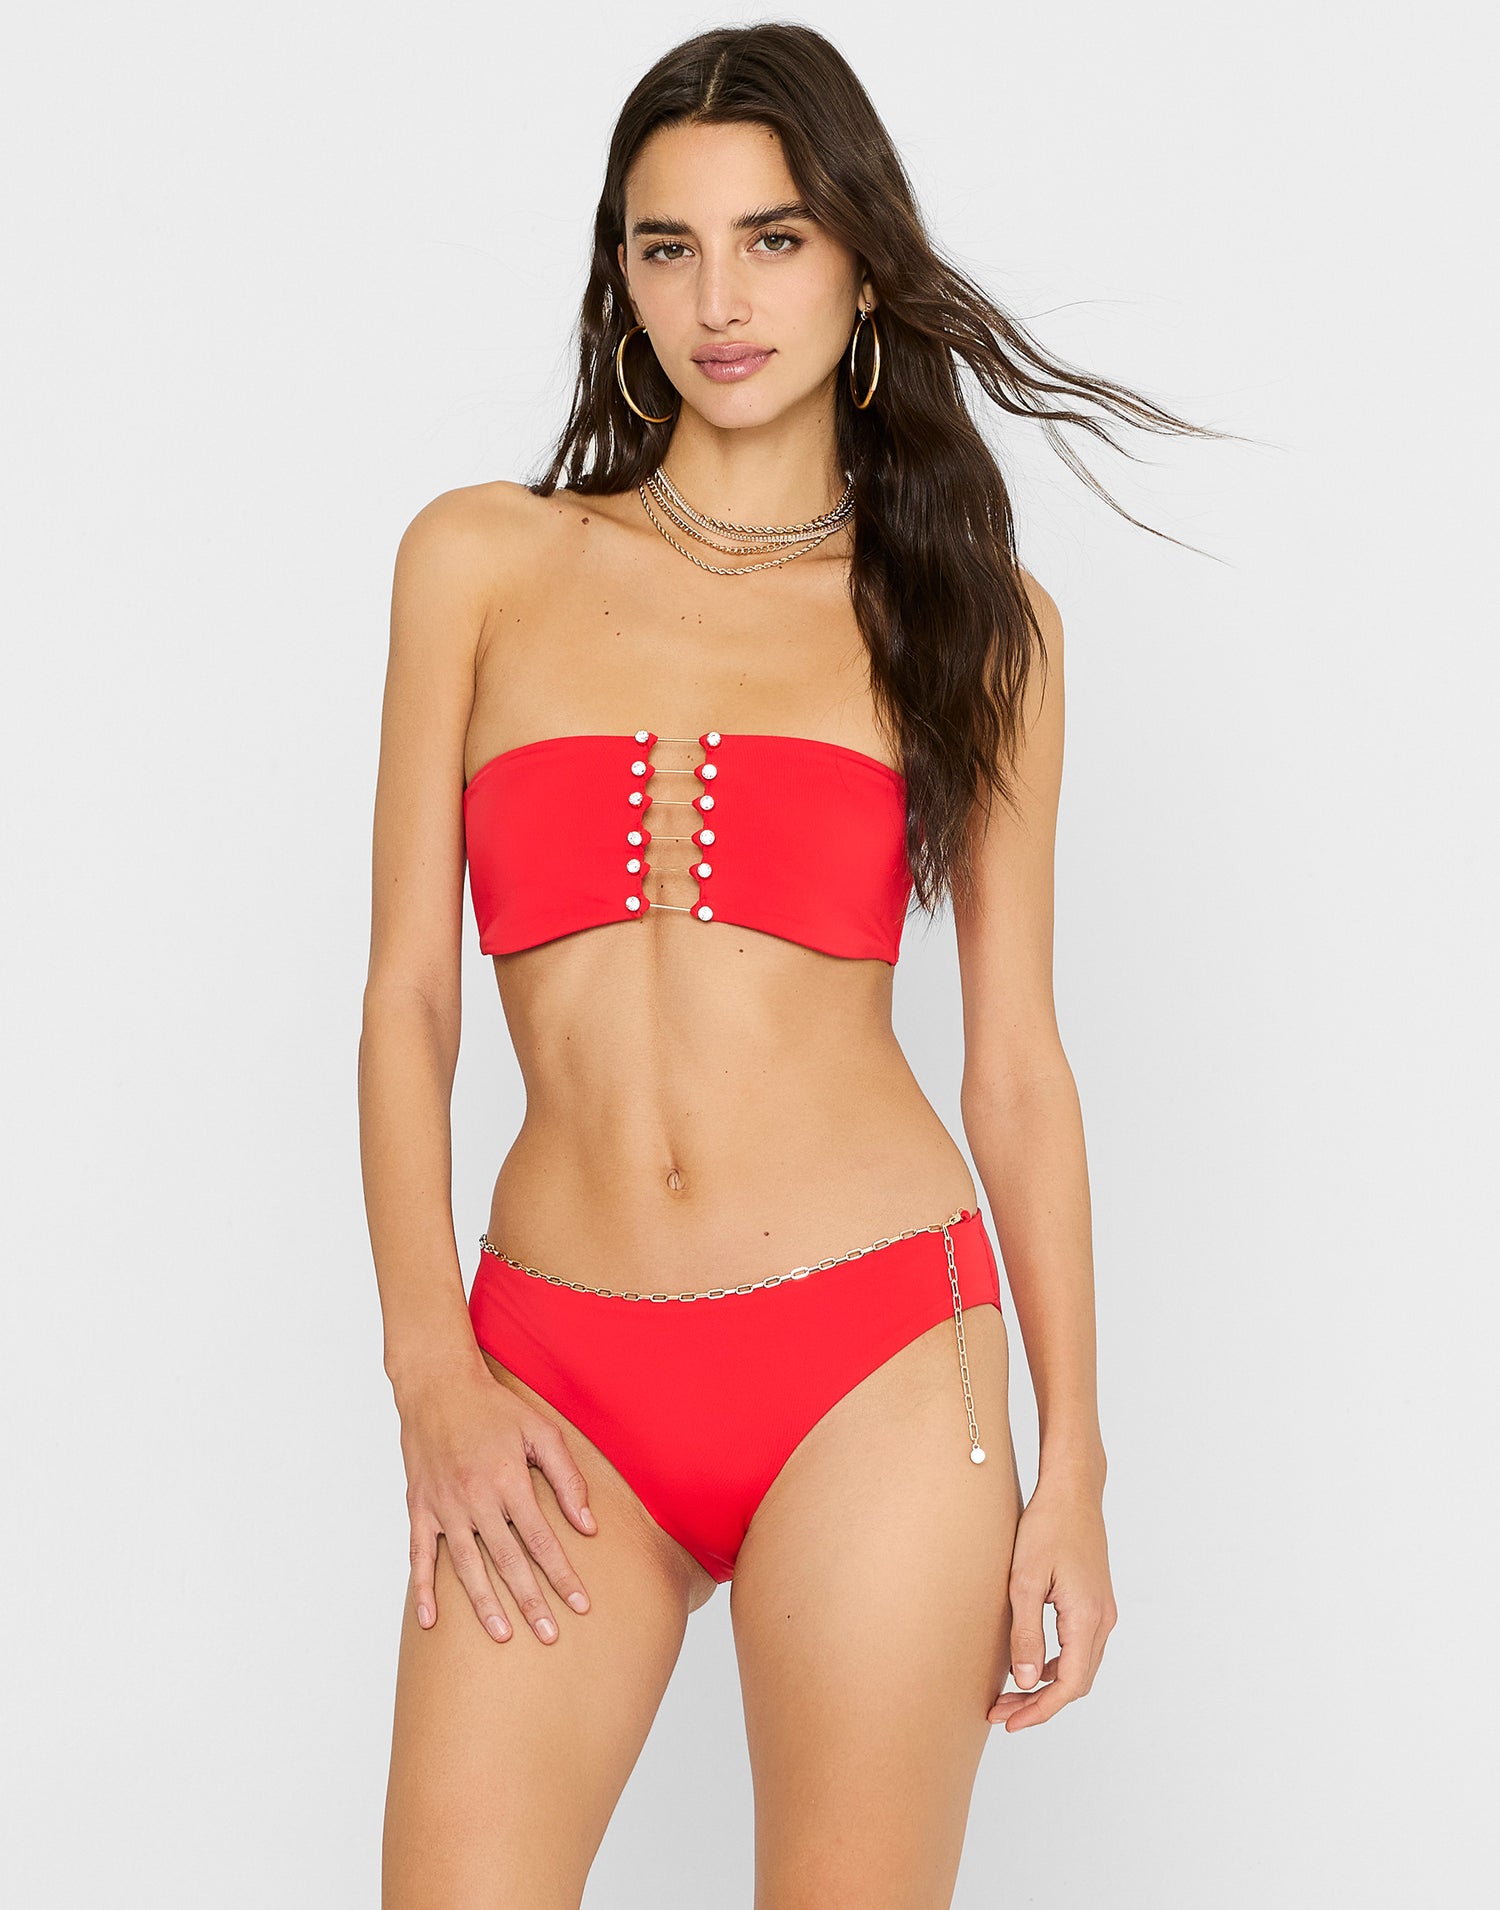 Noelani Bandeau Bikini Top in Red with Crystal Hardware - Front View